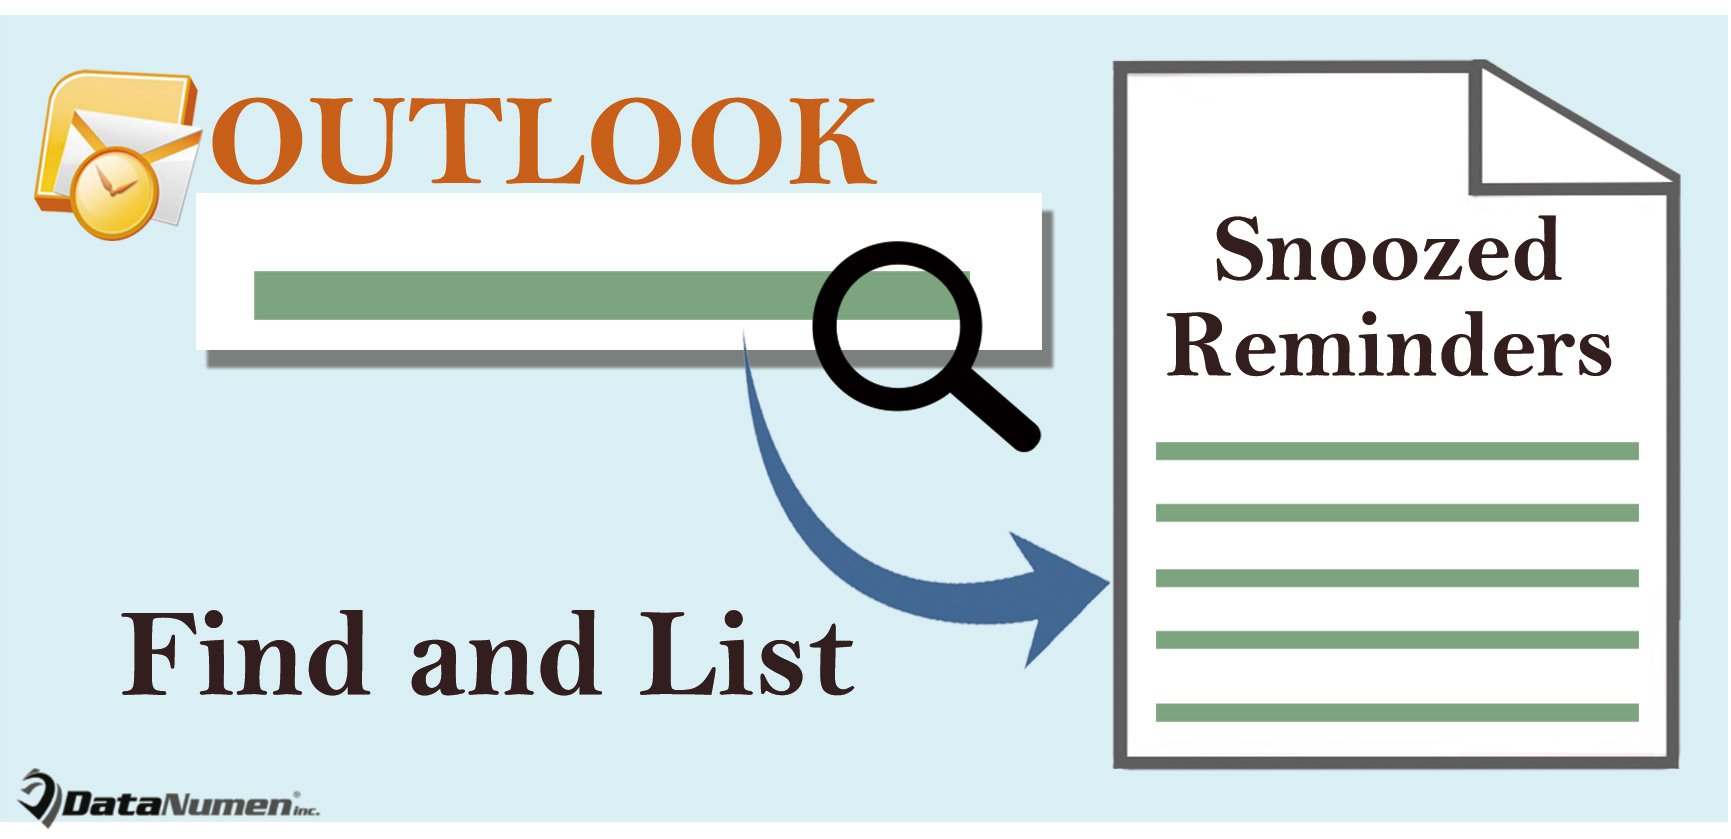 Quickly Get a List of the Snoozed Reminders in Your Outlook